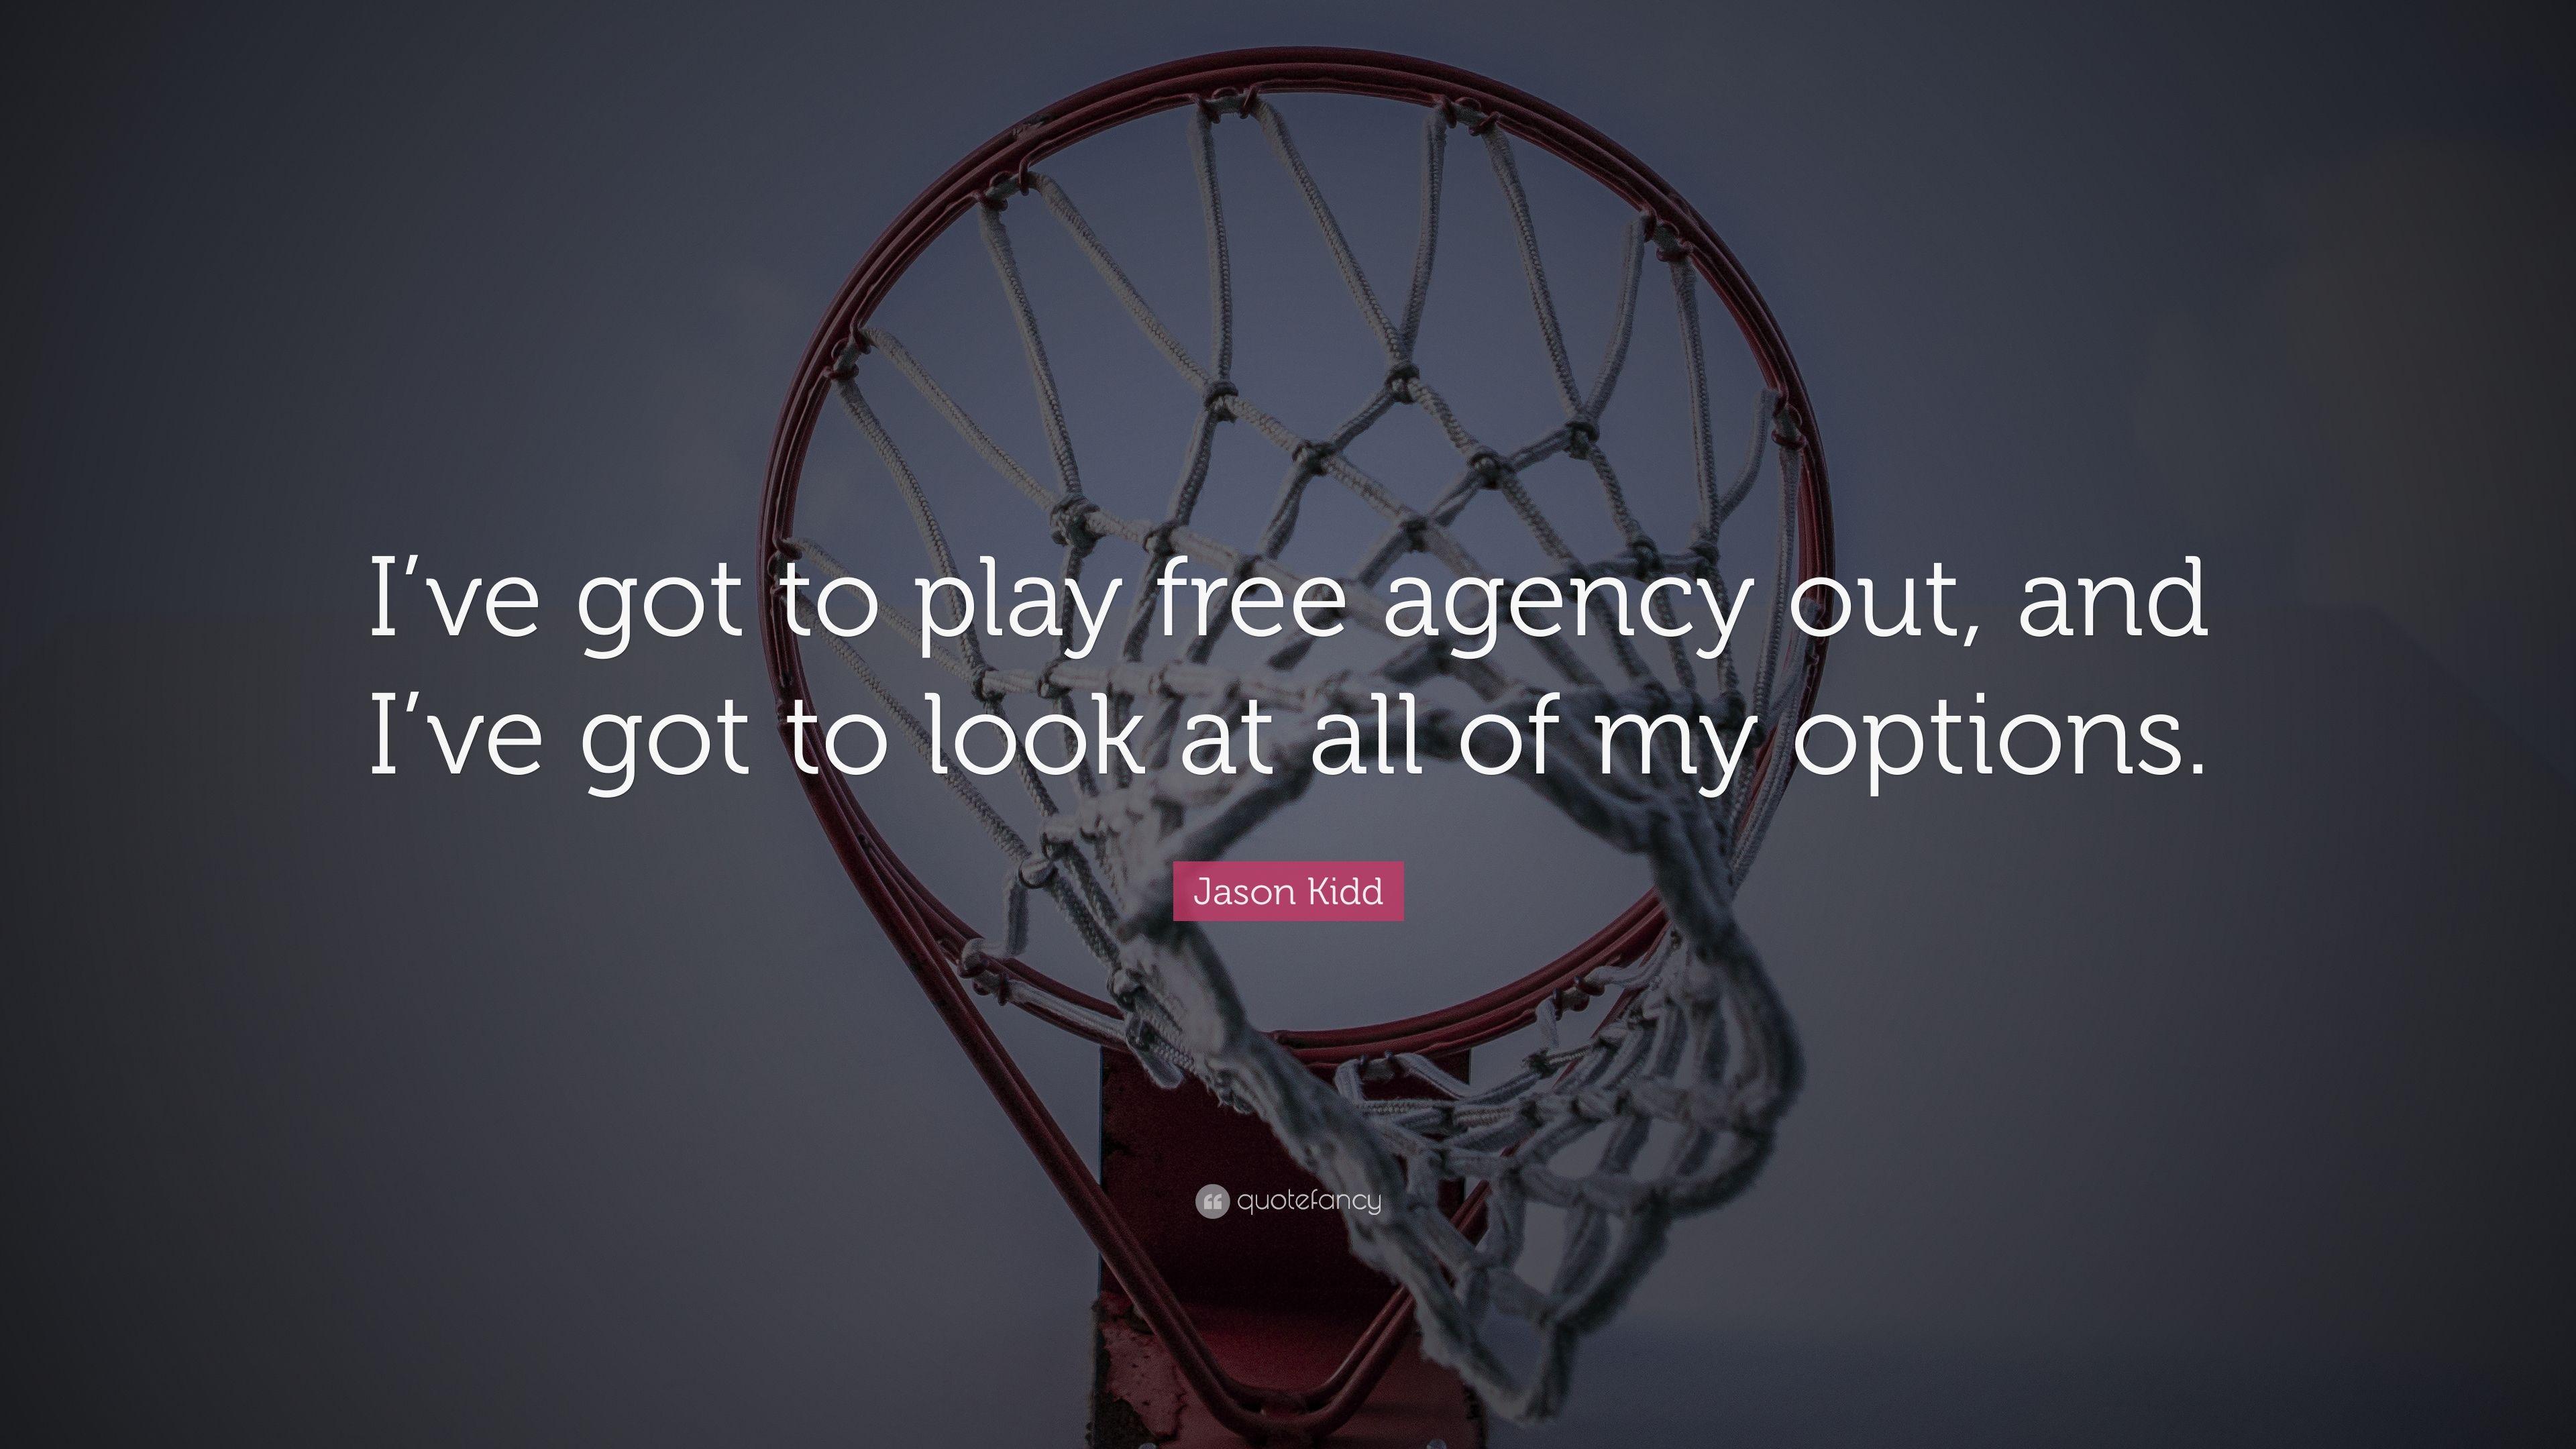 Jason Kidd Quote: “I've got to play free agency out, and I've got to